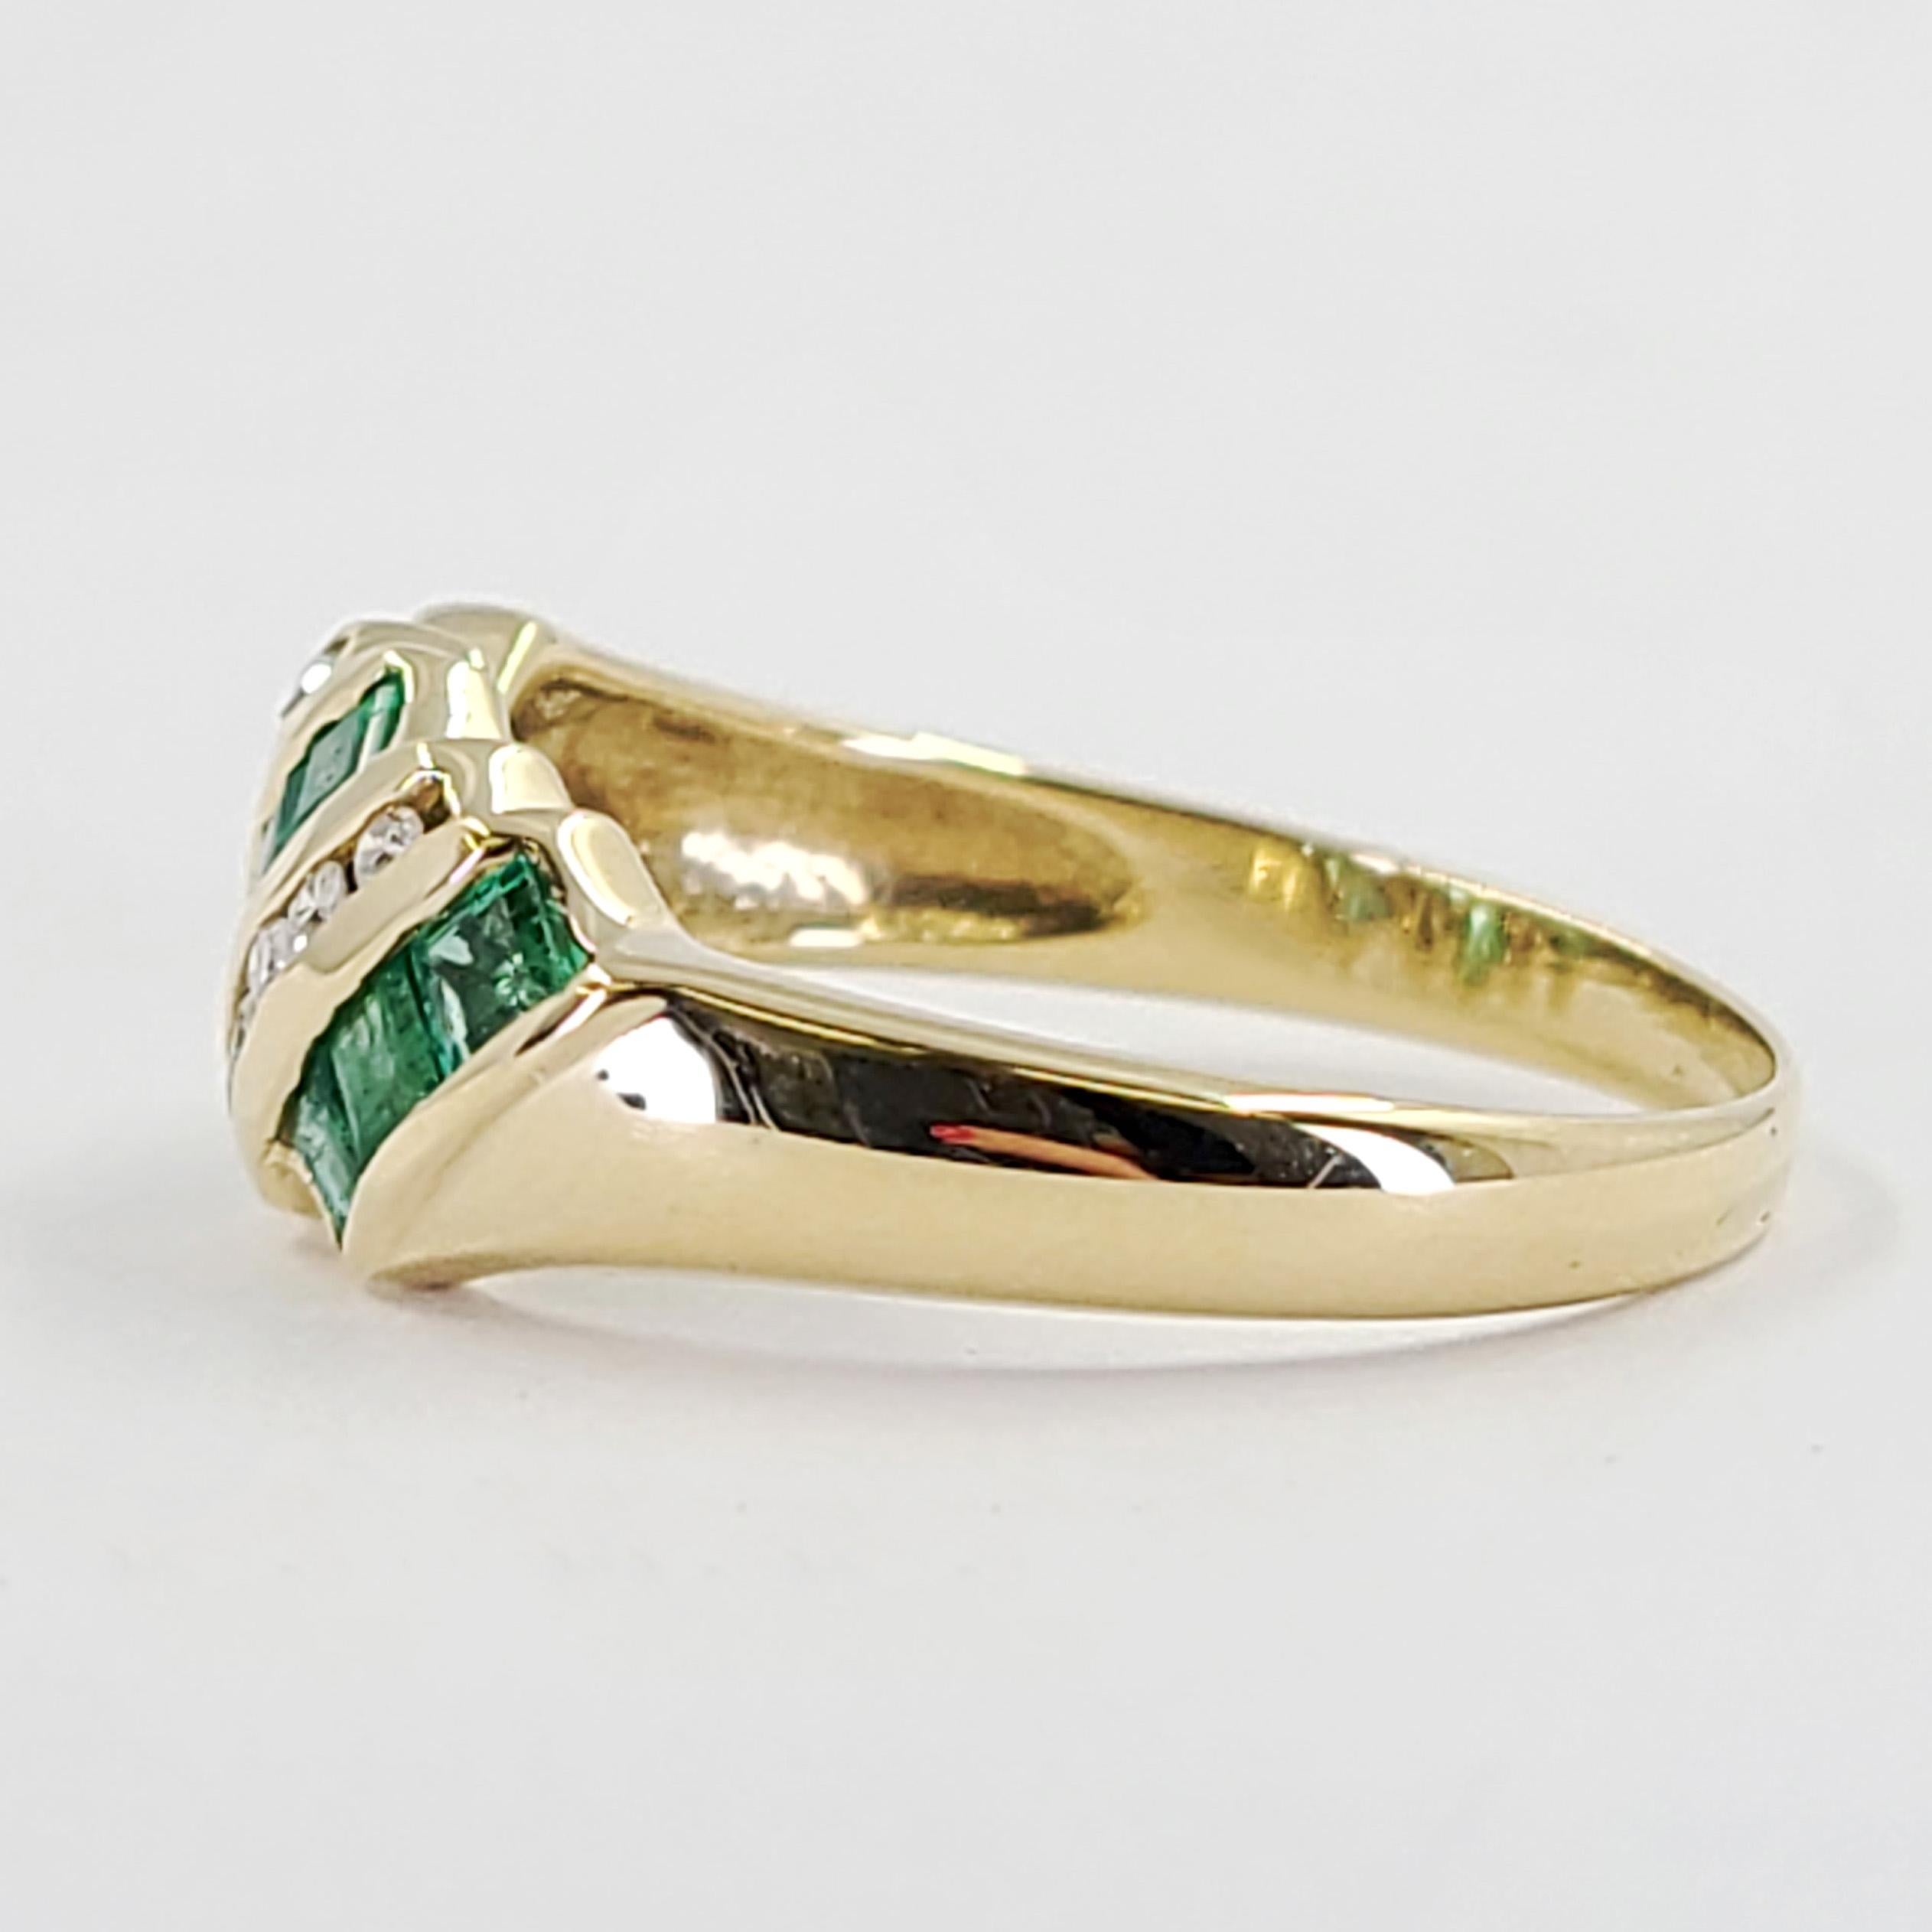 14 Karat Yellow Gold Curved Ring Featuring 10 Square Cut Emerald Totaling Approximately 1.00 Carat & 10 Round Diamonds Of SI Clarity & H Color Totaling 0.10 Carats In Channel Settings. Finger Size 7; Purchase Includes One Sizing Service Prior to